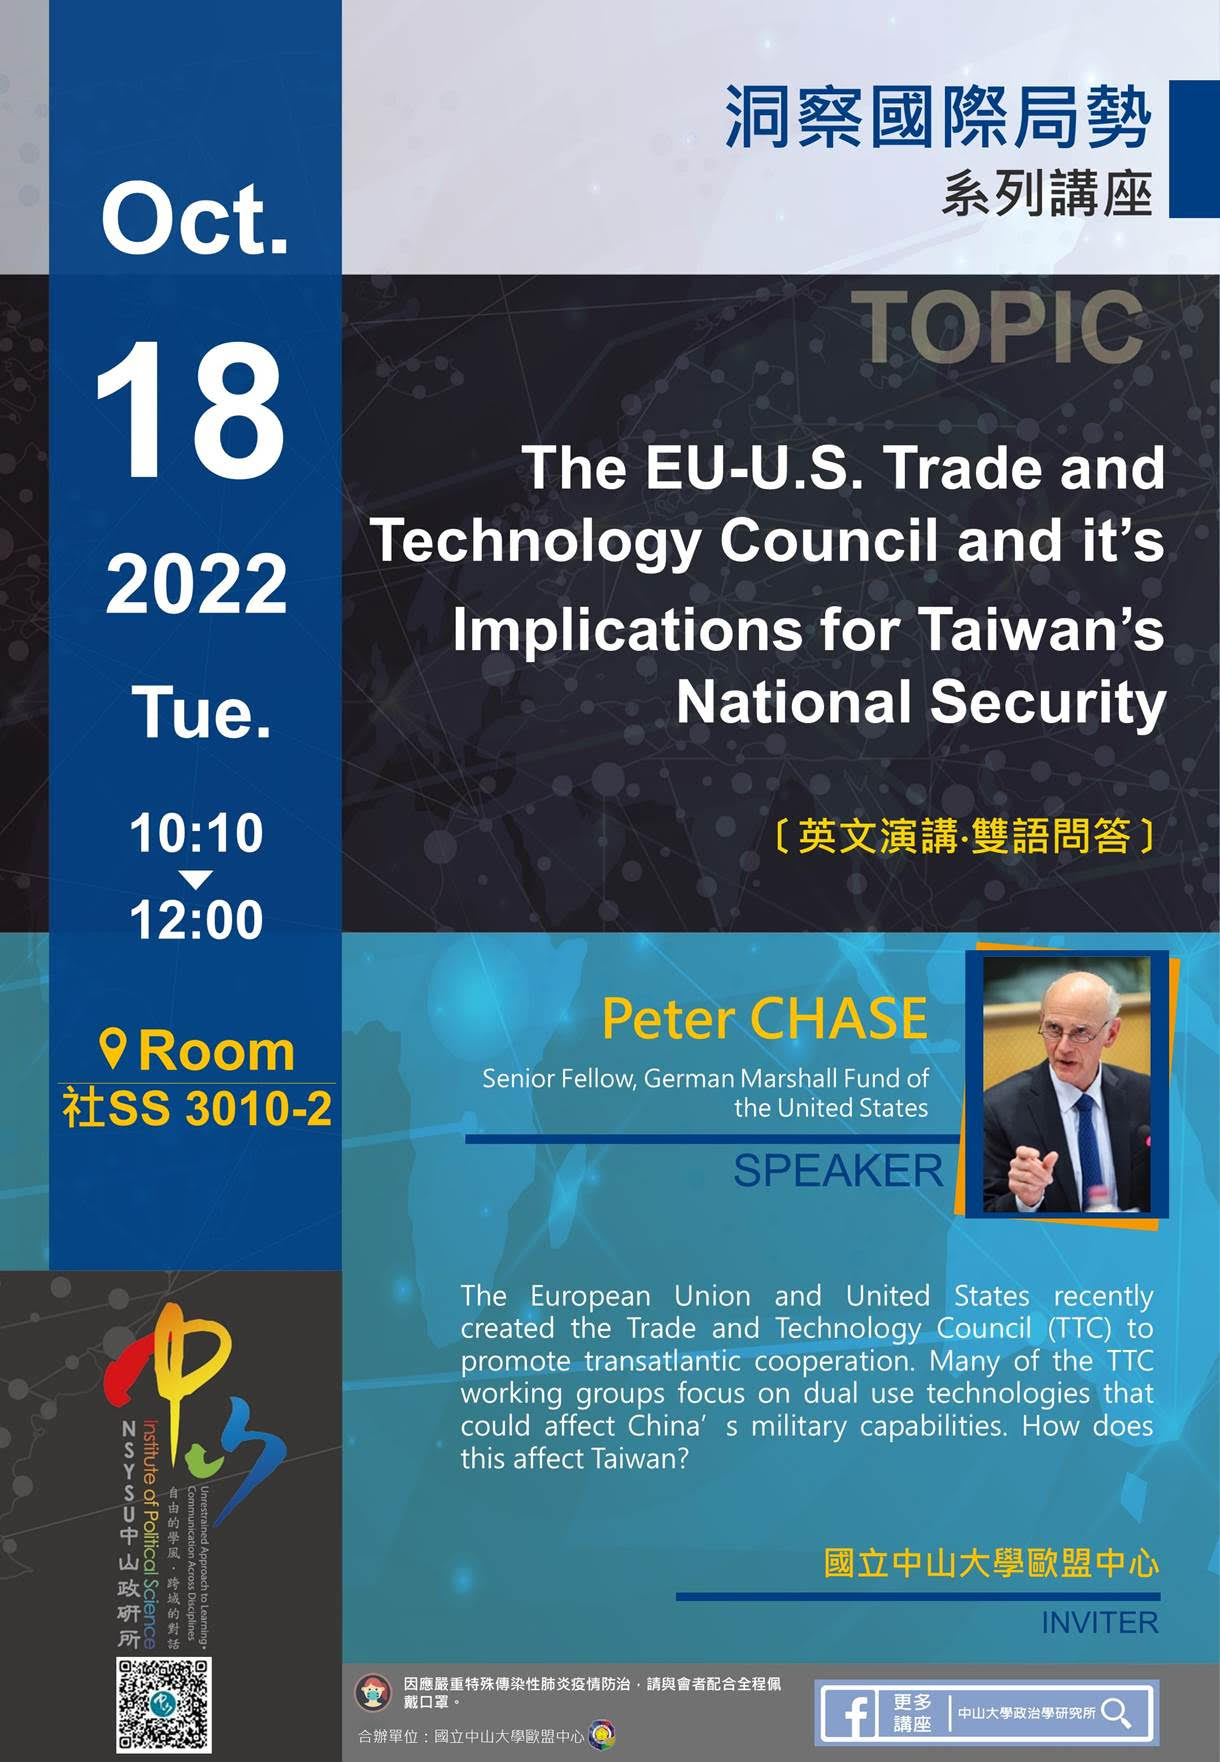 Peter CHASE：The EU-U.S. Trade and Technology Council and it’s Implications for Taiwan’s National Security